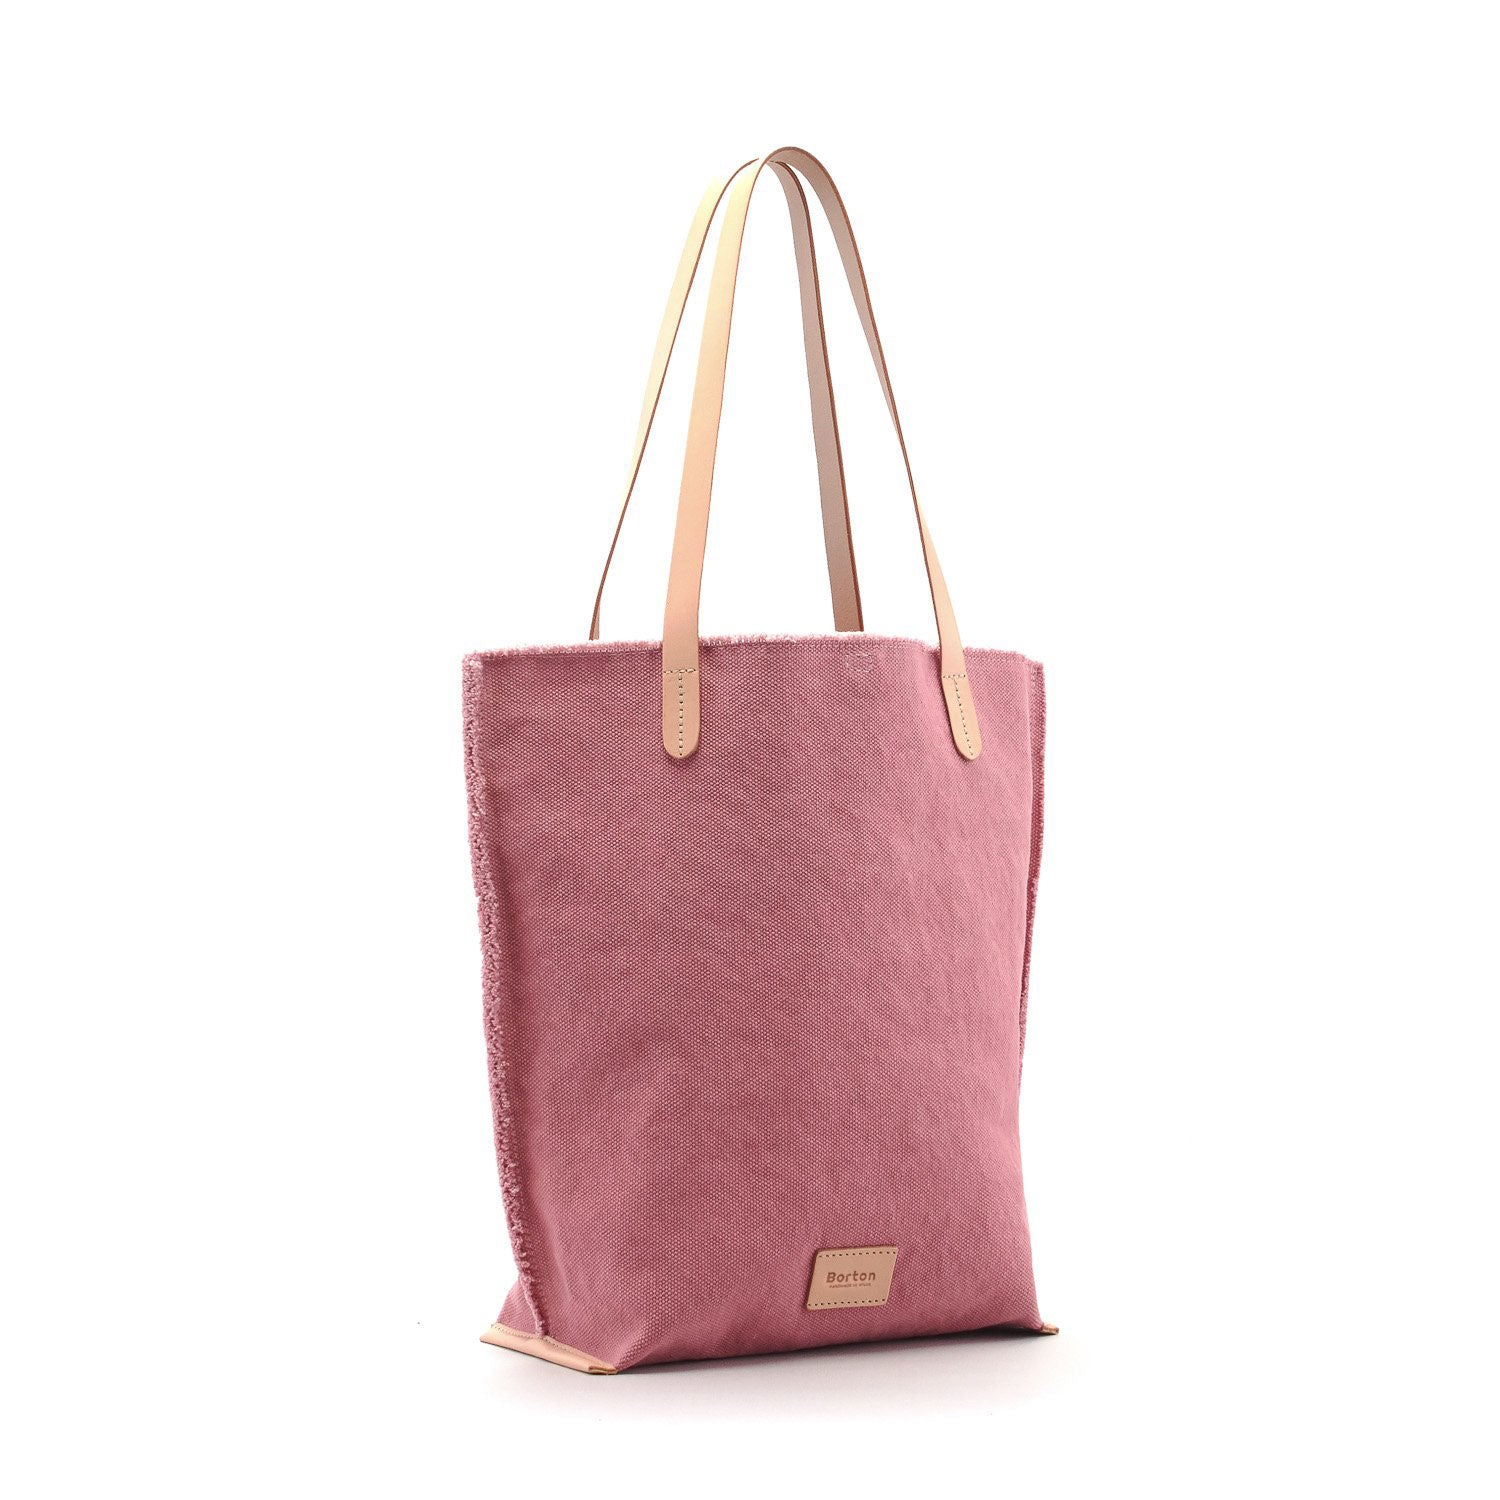 Mery Tote Bag Pink Canvas & Natural Leather